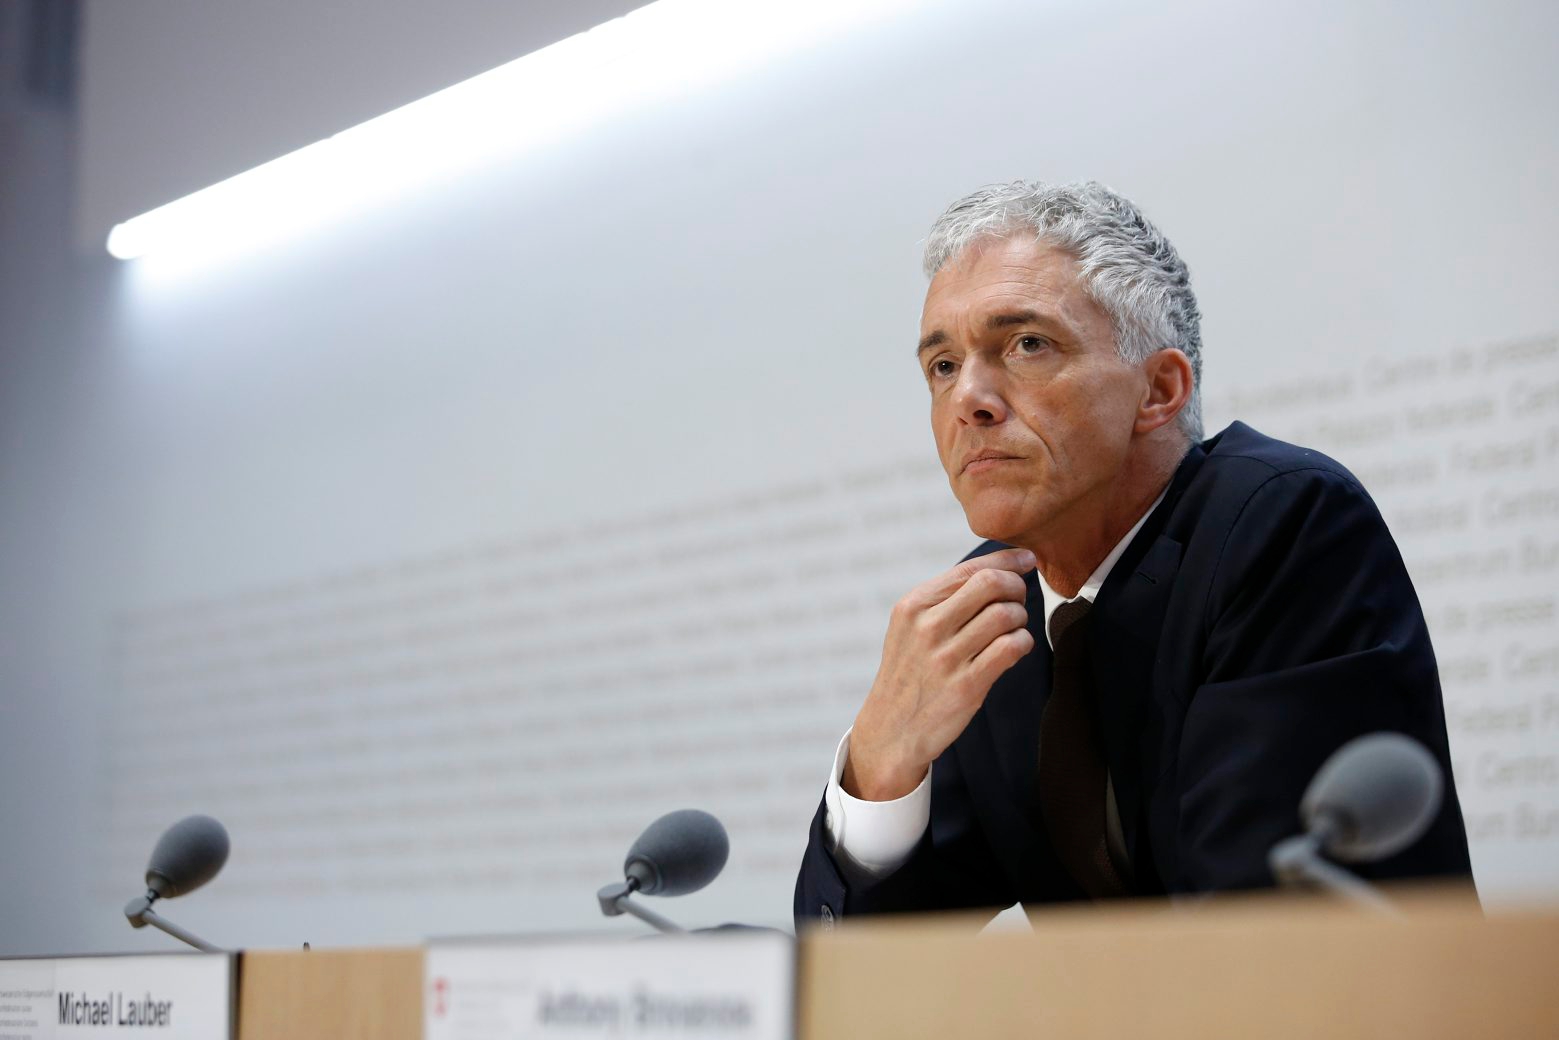 Swiss Federal Attorney Michael Lauber reacts during a media conference at the Media Centre of the Federal Parliament in Bern, Switzerland, on Friday, 10 May 2019. Federal Attorney Michael Lauber is criticised for informal meetings with FIFA head Gianni Infantino. The supervisory authority for the Federal Prosecutor's Office is opening a disciplinary investigation against Lauber. (KEYSTONE/Peter Klaunzer) SCHWEIZ BUNDESANWALTSCHAFT LAUBER